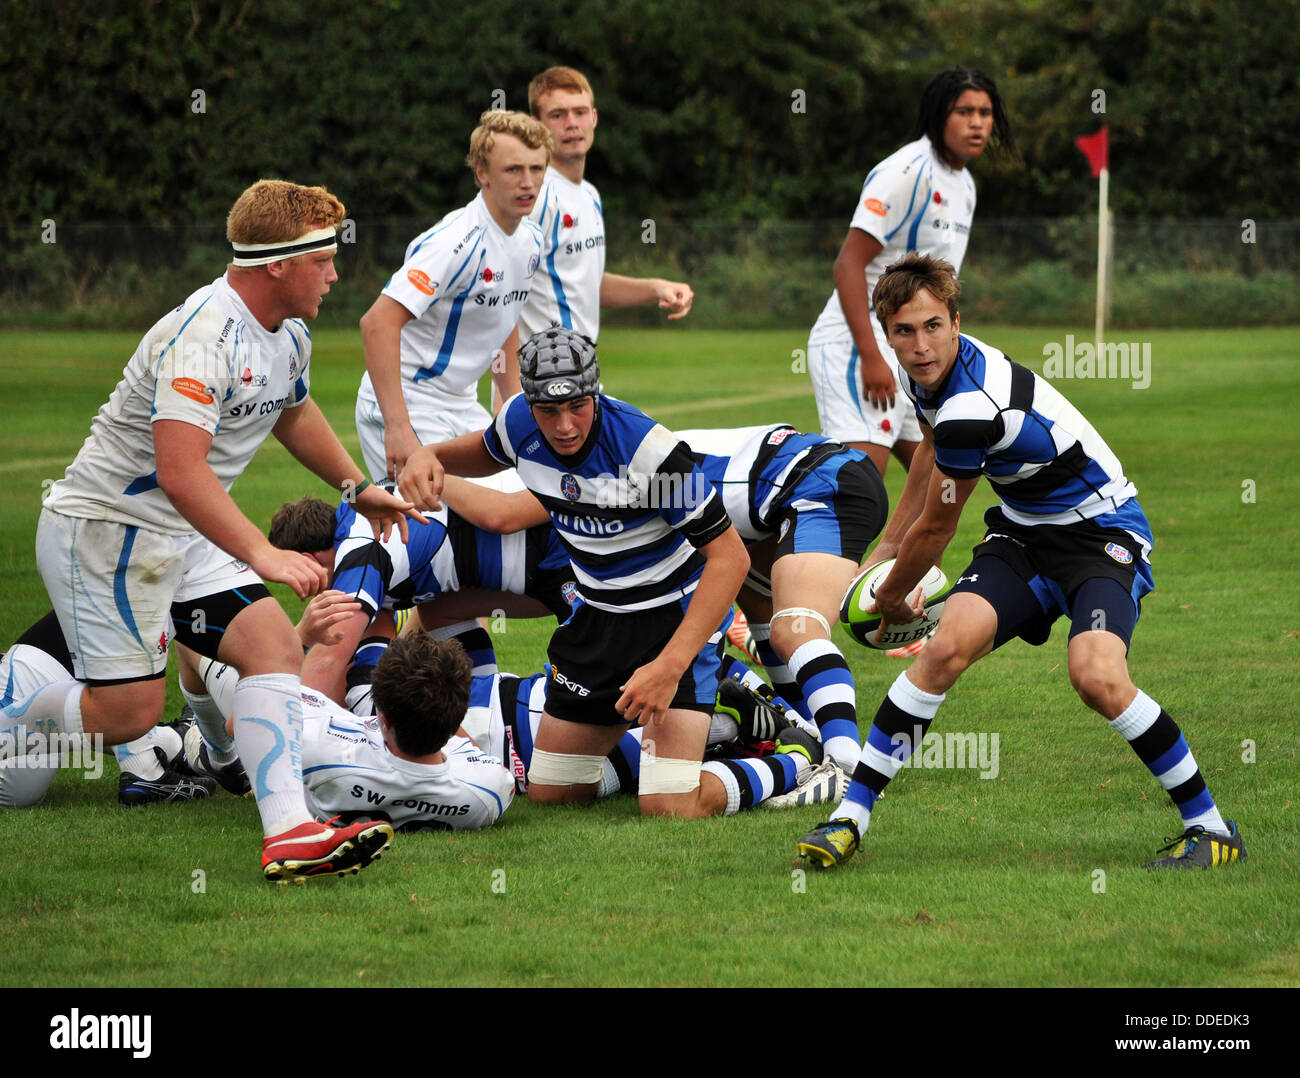 A youth rugby match Stock Photo